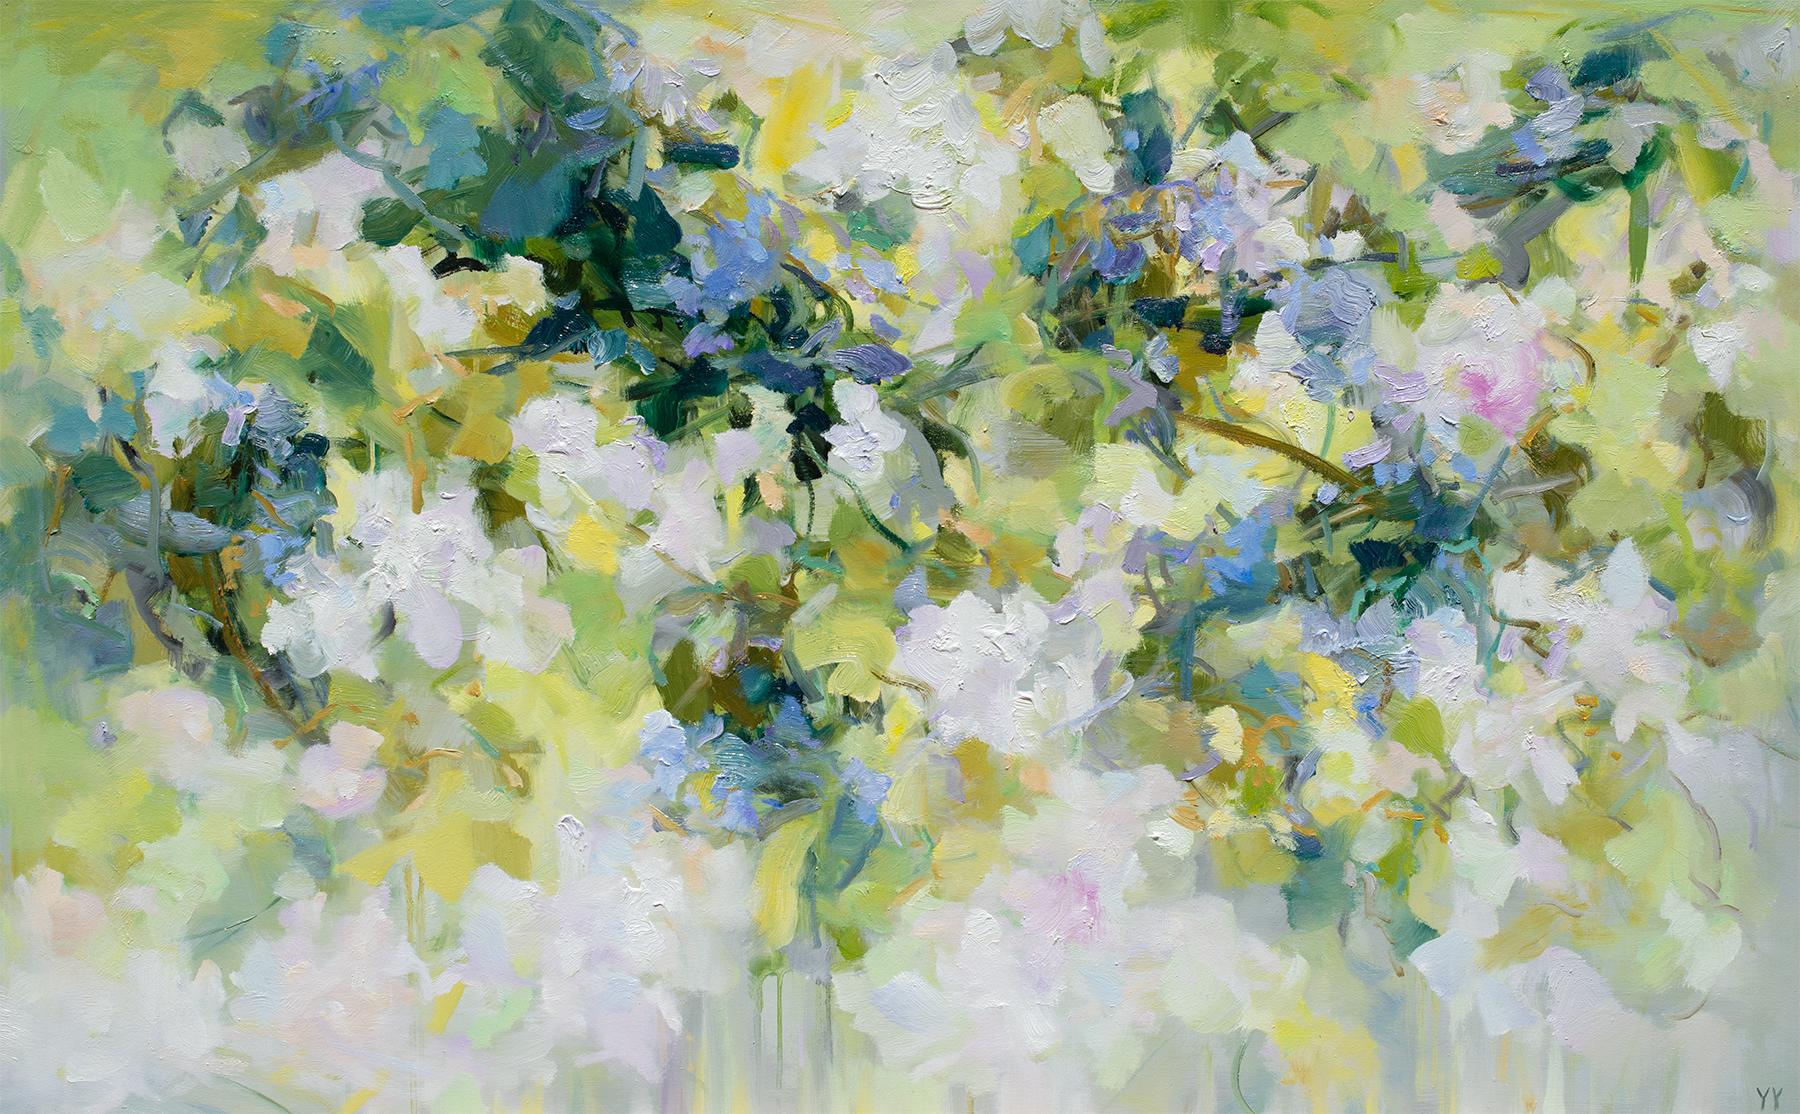 'Spring Equinox' 2023 by Chinese/Canadian artist Yangyang Pan. Oil on canvas, 30 x 48 in. / Frame: 31 in. x 49 in. This beautiful abstract-expressionistic landscape painting incorporates gestural brushstrokes resembling a floral garden in pastel